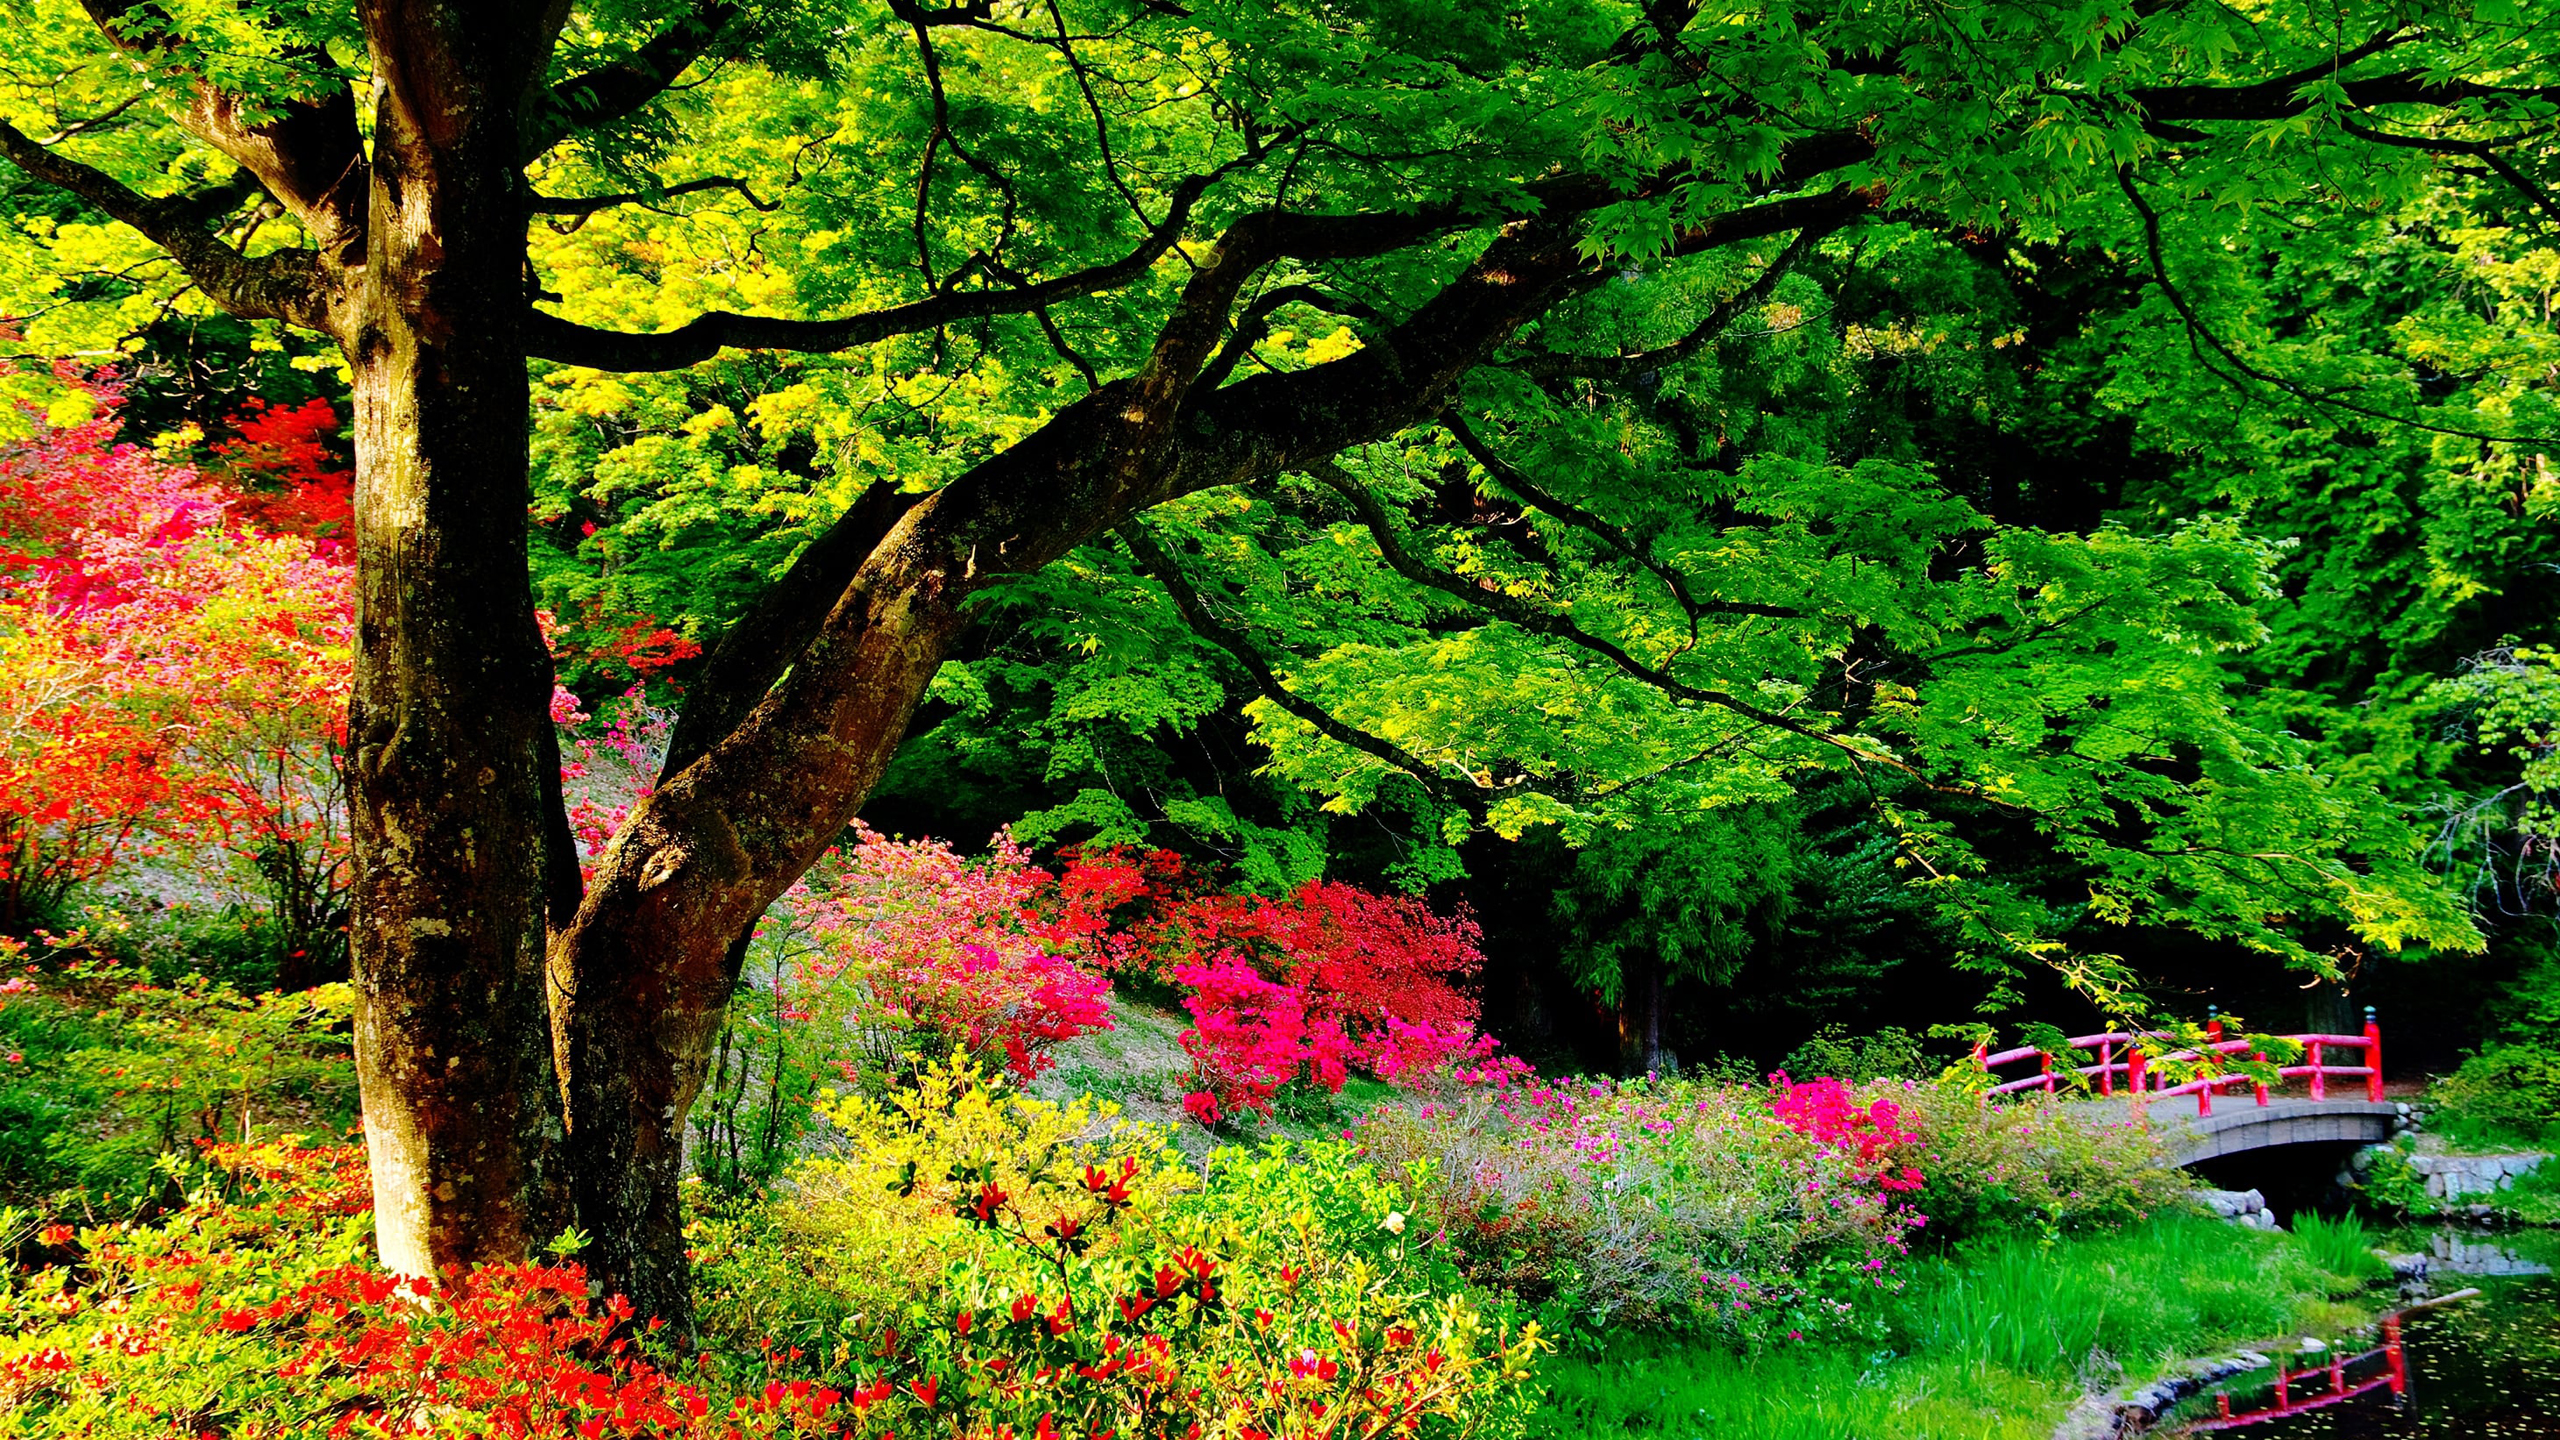 Colorful Flowers Beautiful Garden Green Trees Branches Bridge Plants Bushes HD Nature